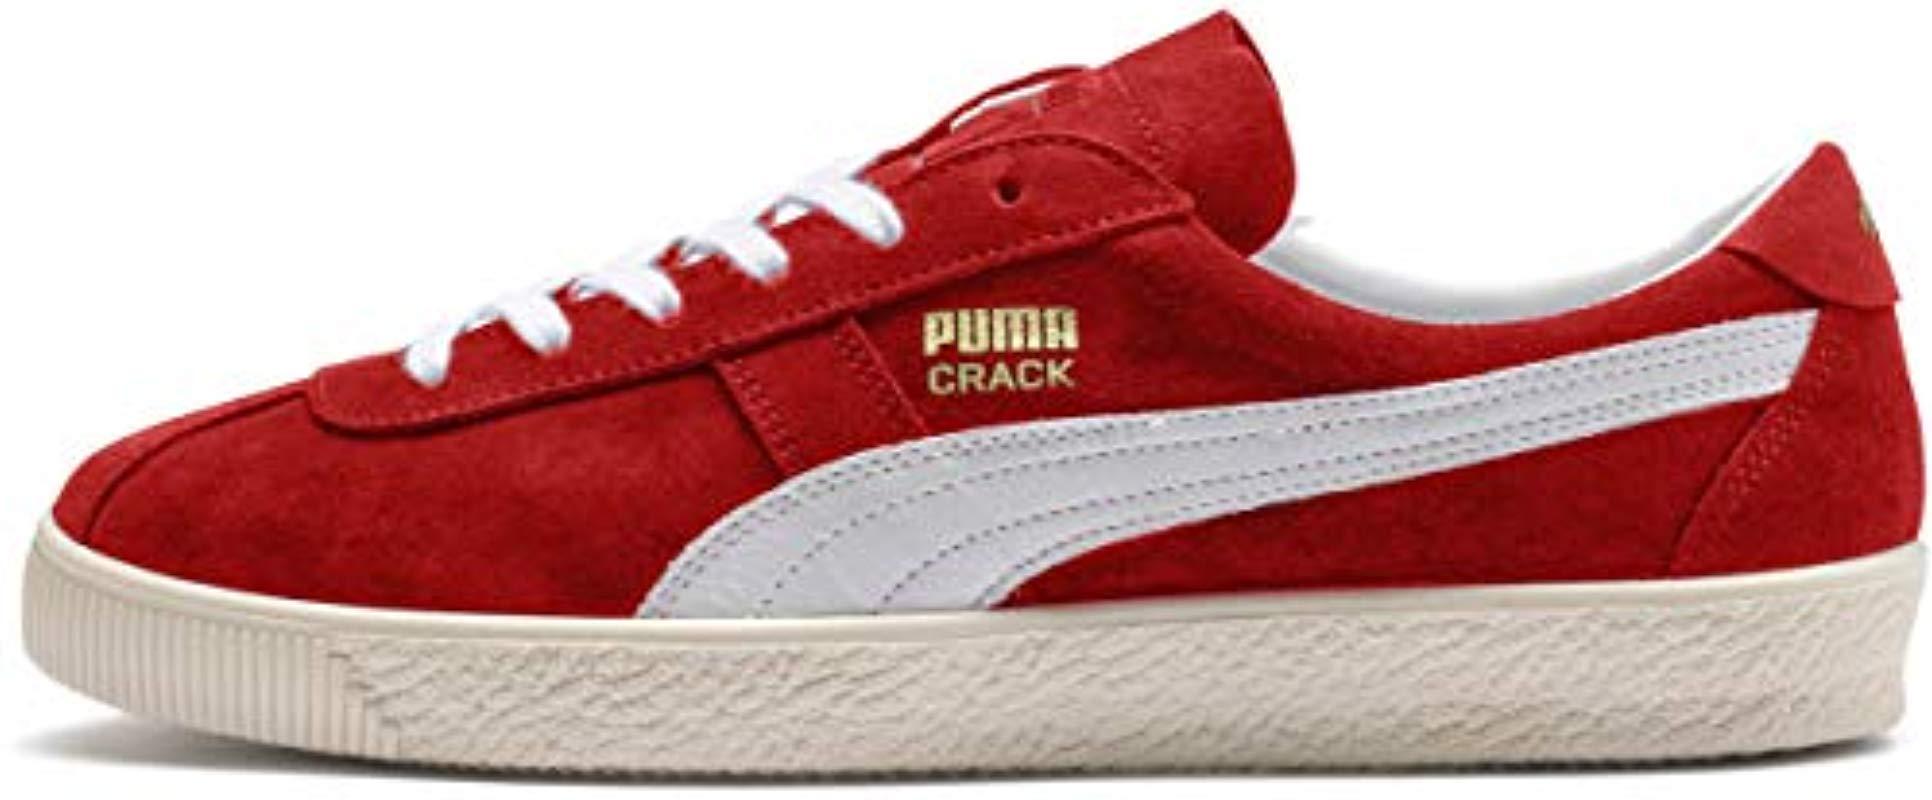 PUMA Crack Heritage Sneaker in Red for Men - Save 1% - Lyst